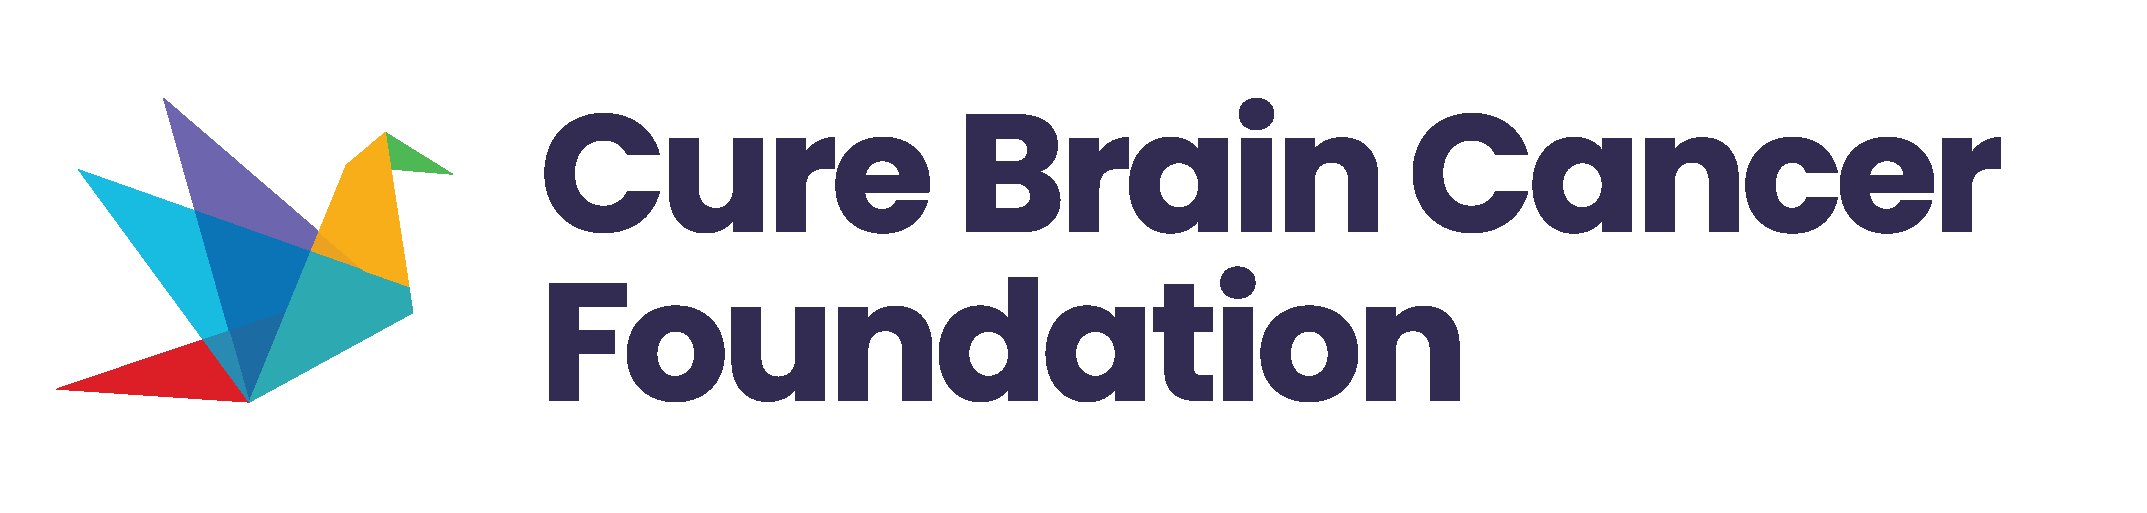 Cure Brain Cancer Foundation logo.png